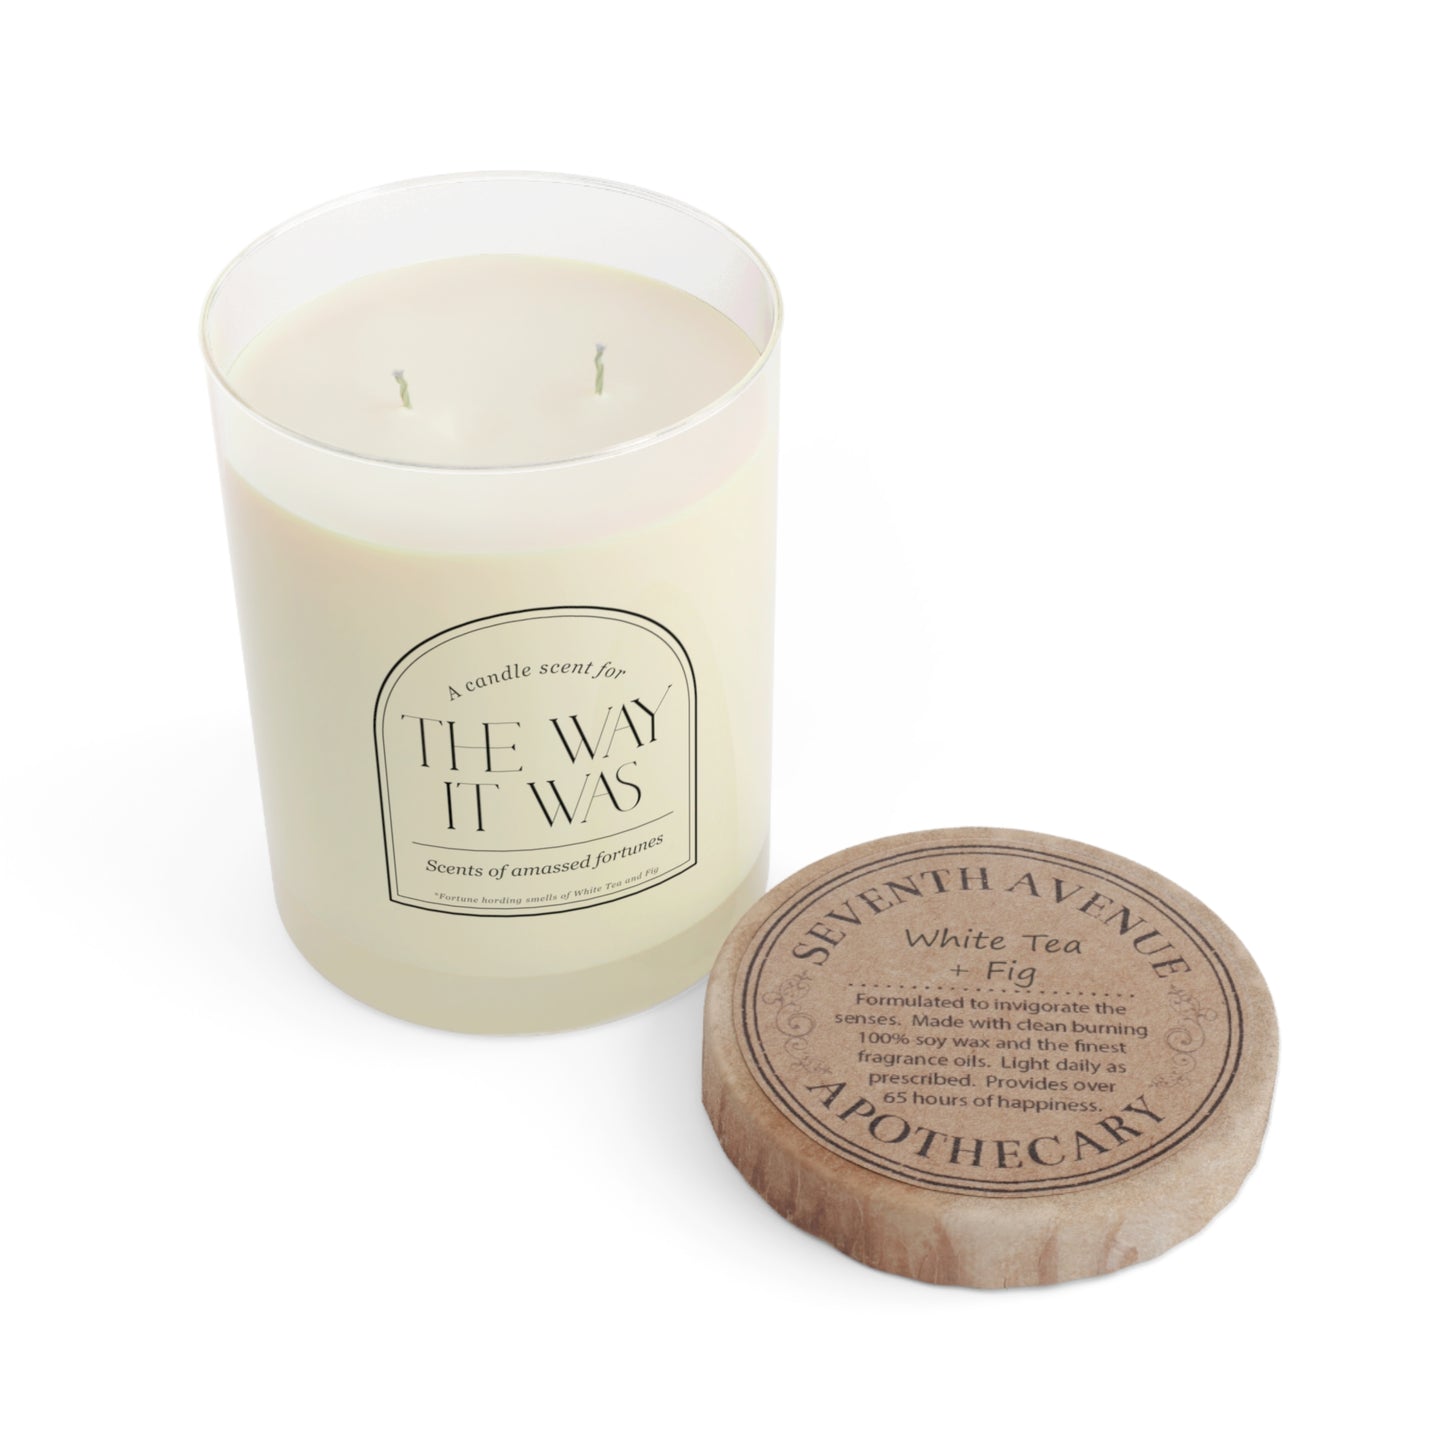 Scents of amassed fortunes - White Tea and Fig Scented Candle